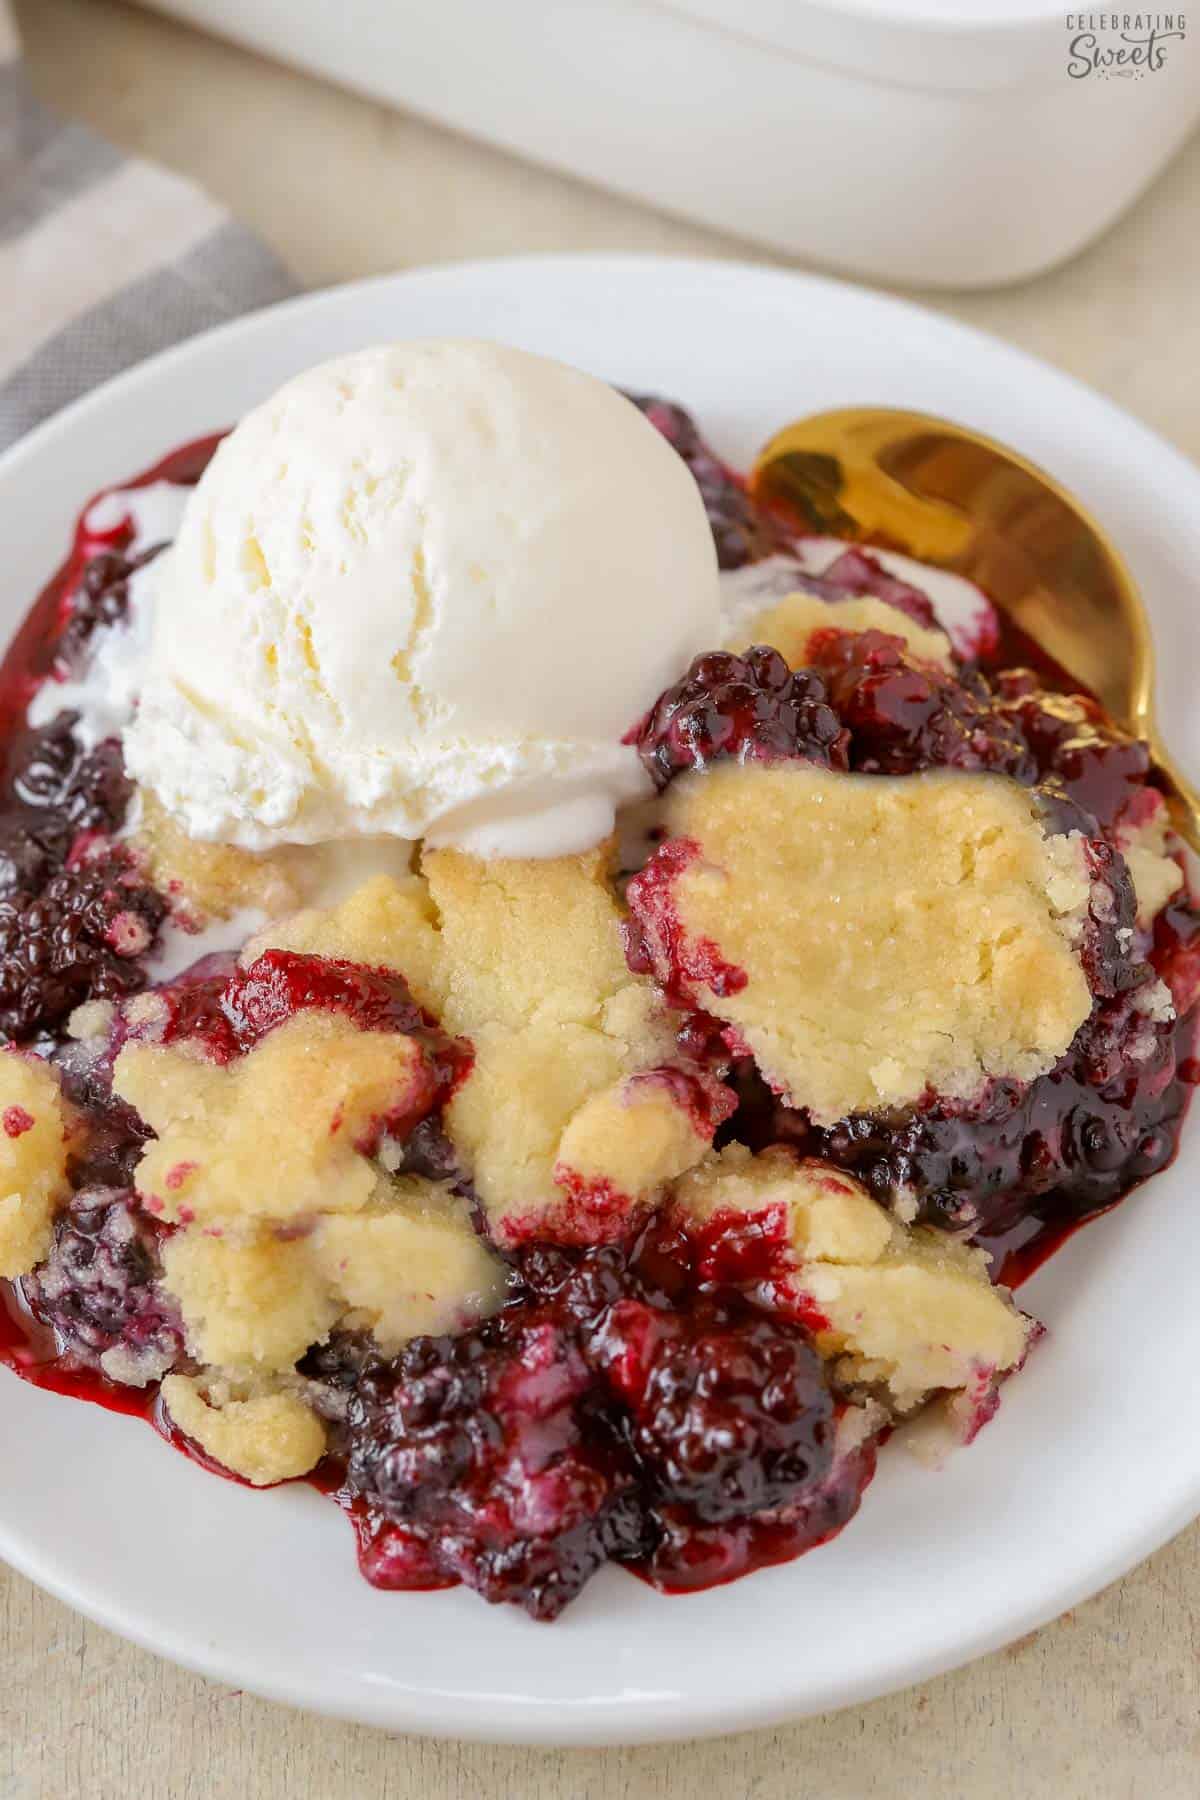 Blackberry cobbler topped with vanilla ice cream on a white plate with a gold spoon.